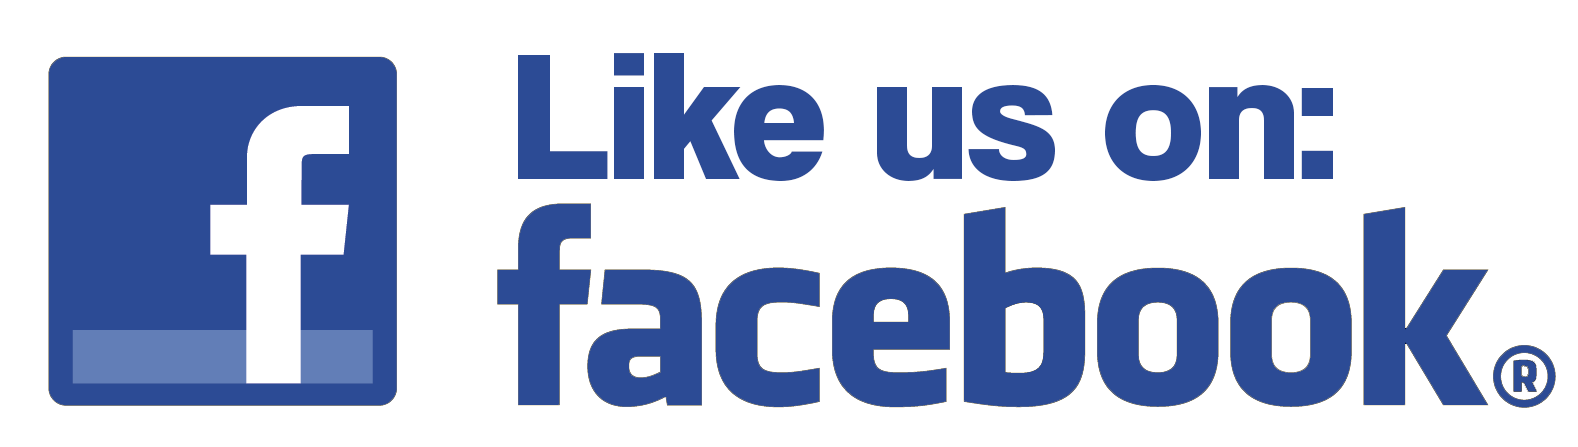 Visit Us On Facebook Logo - Like Us On Facebook Logo Png (88+ images in Collection) Page 2